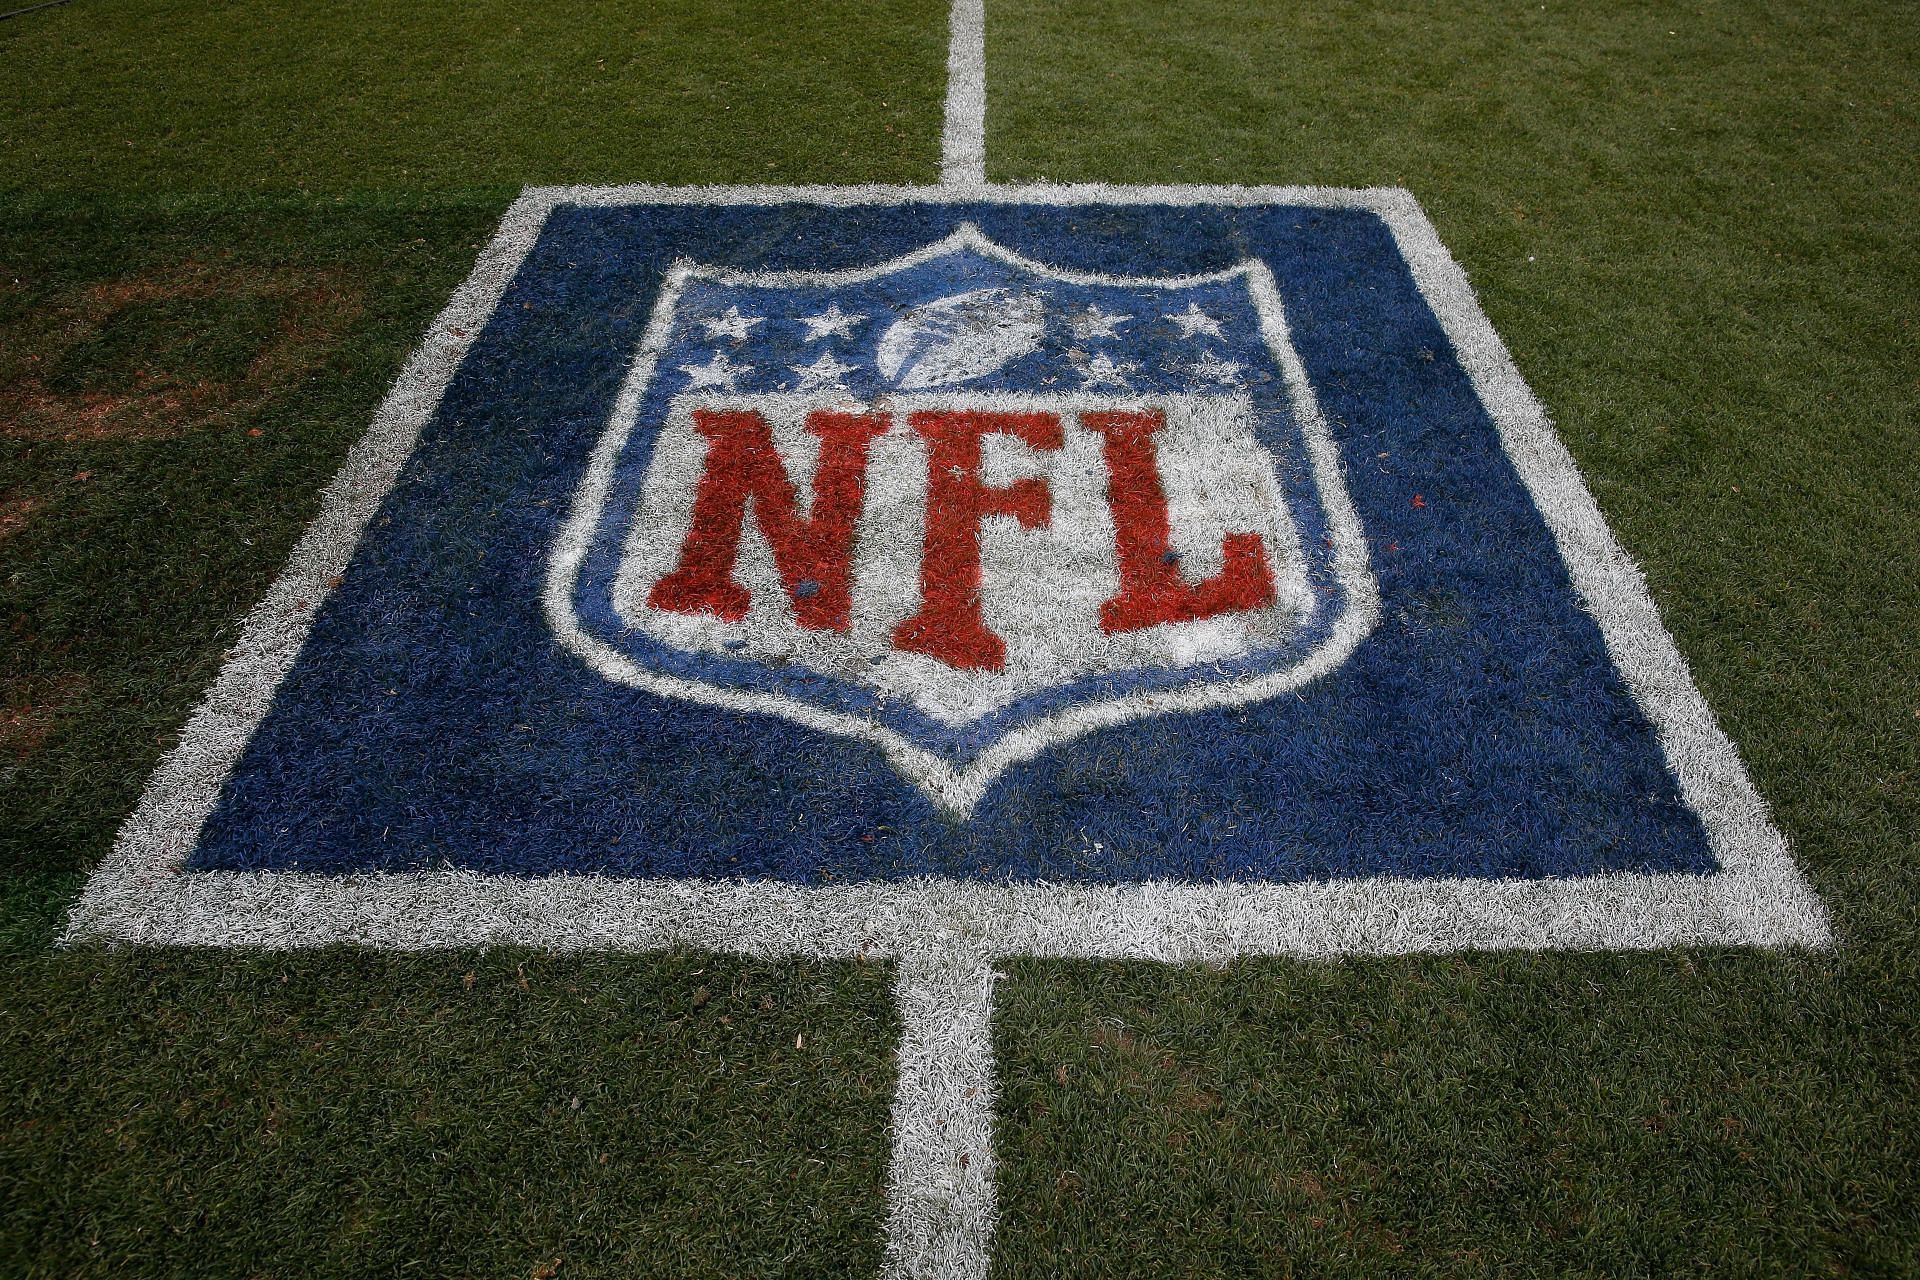 How do the NFL salary cap and cap space work? A detailed look at the system